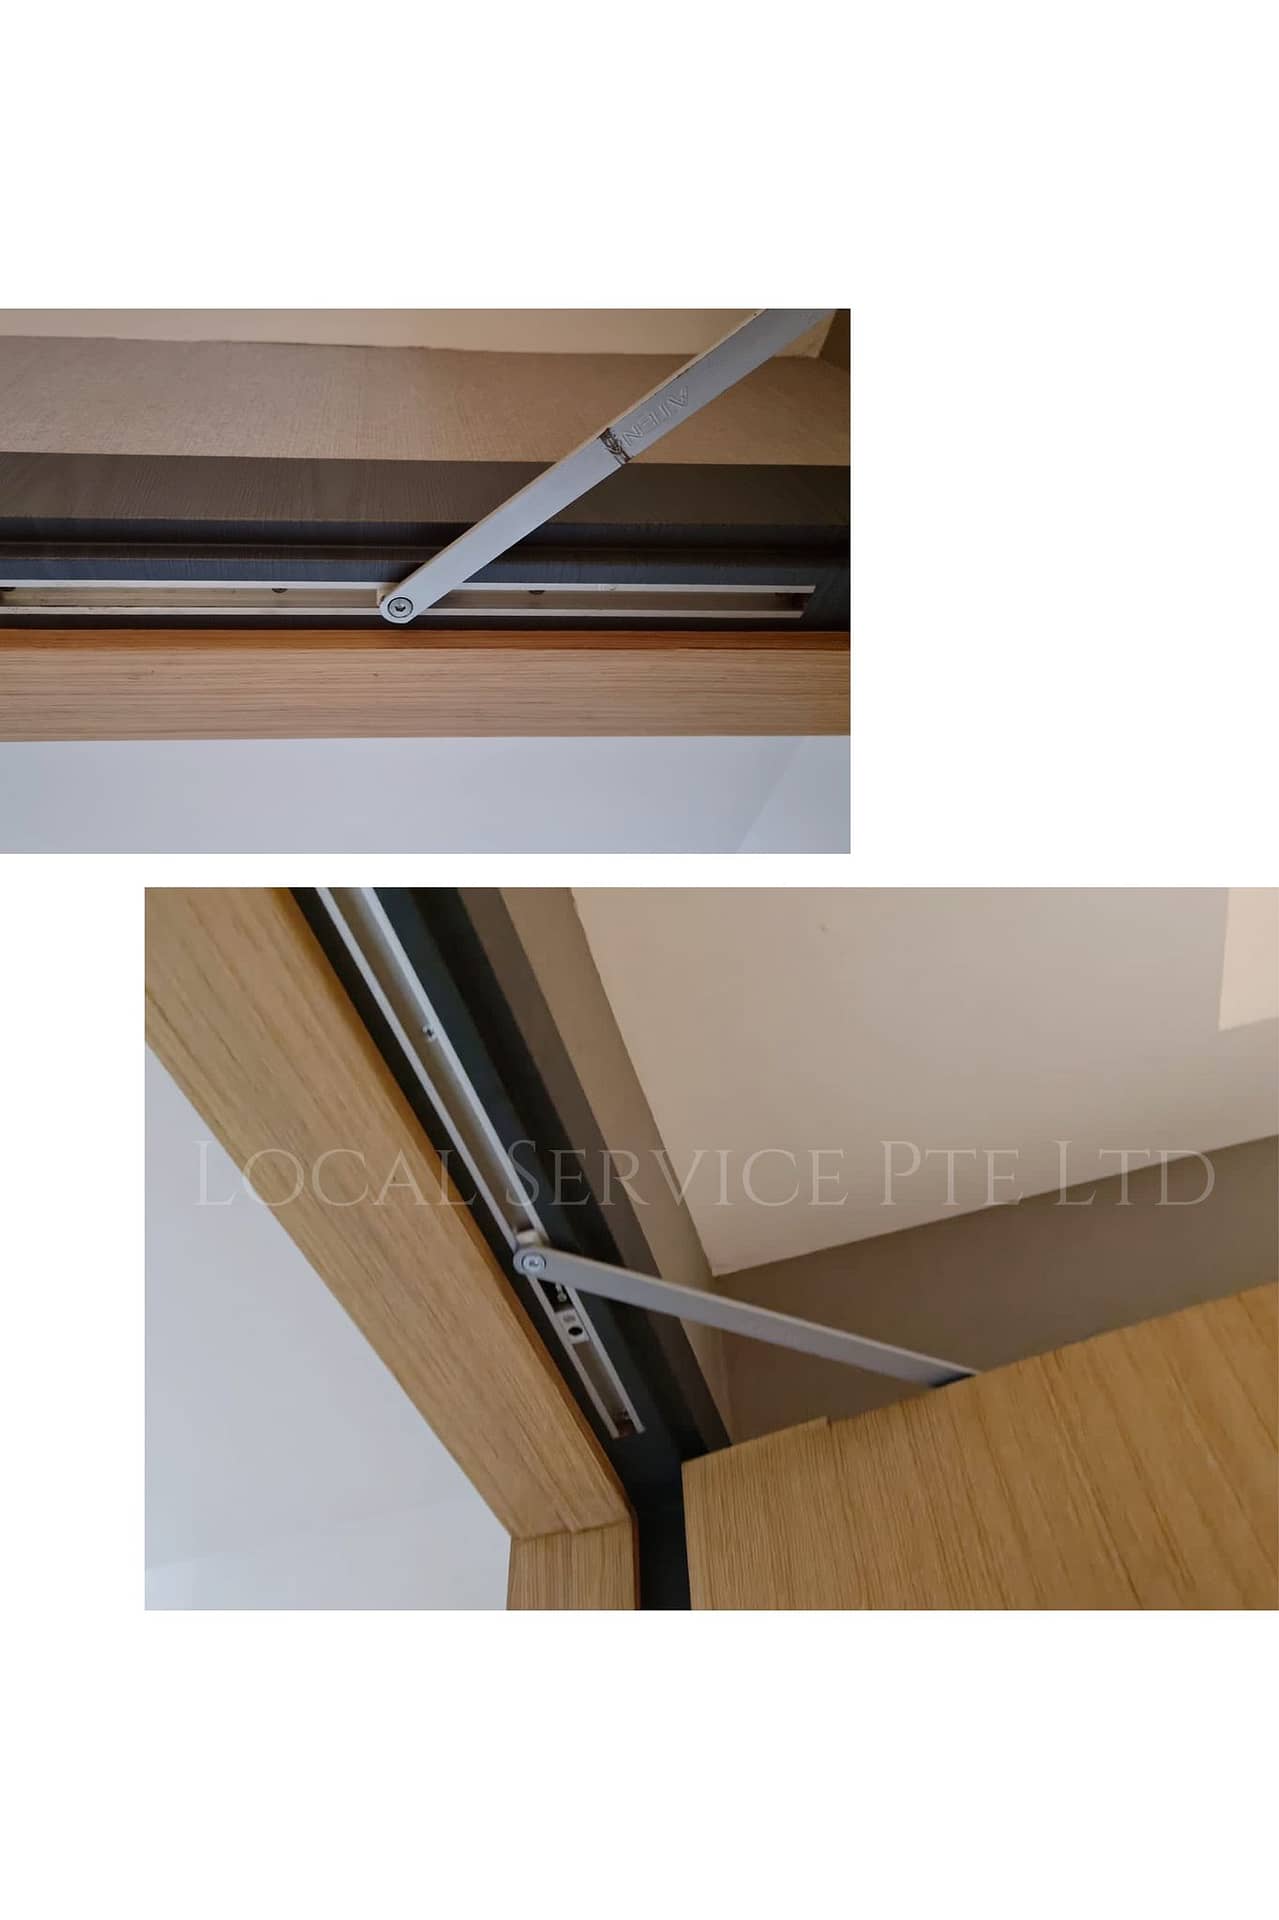 Supply And Replace Conceal Door Closer